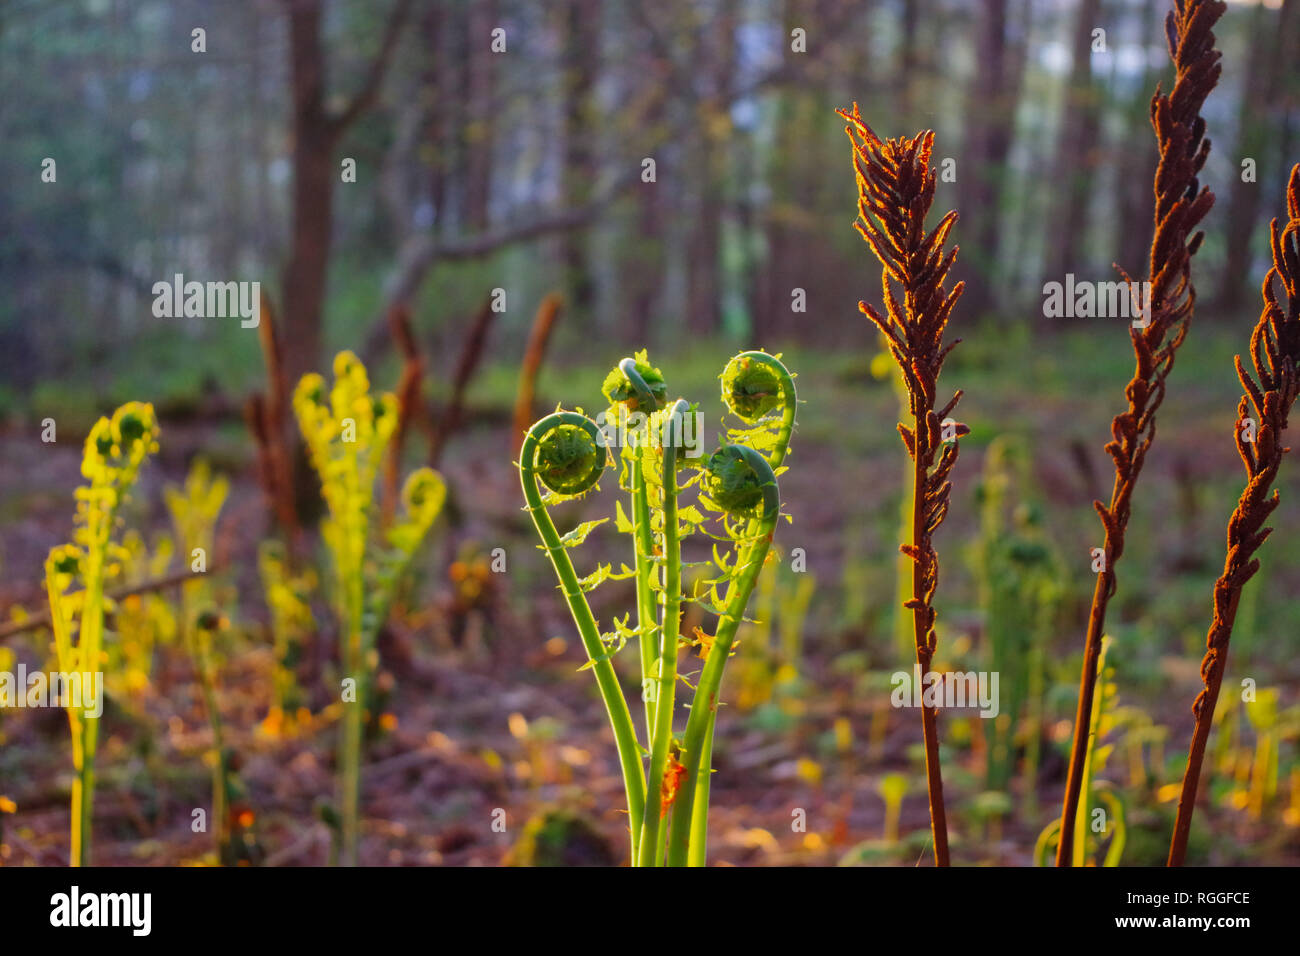 Wild Fiddleheads / Ostrich Fern growing in the spring woods. A delicious wild edible food, a favorite of foragers. Stock Photo